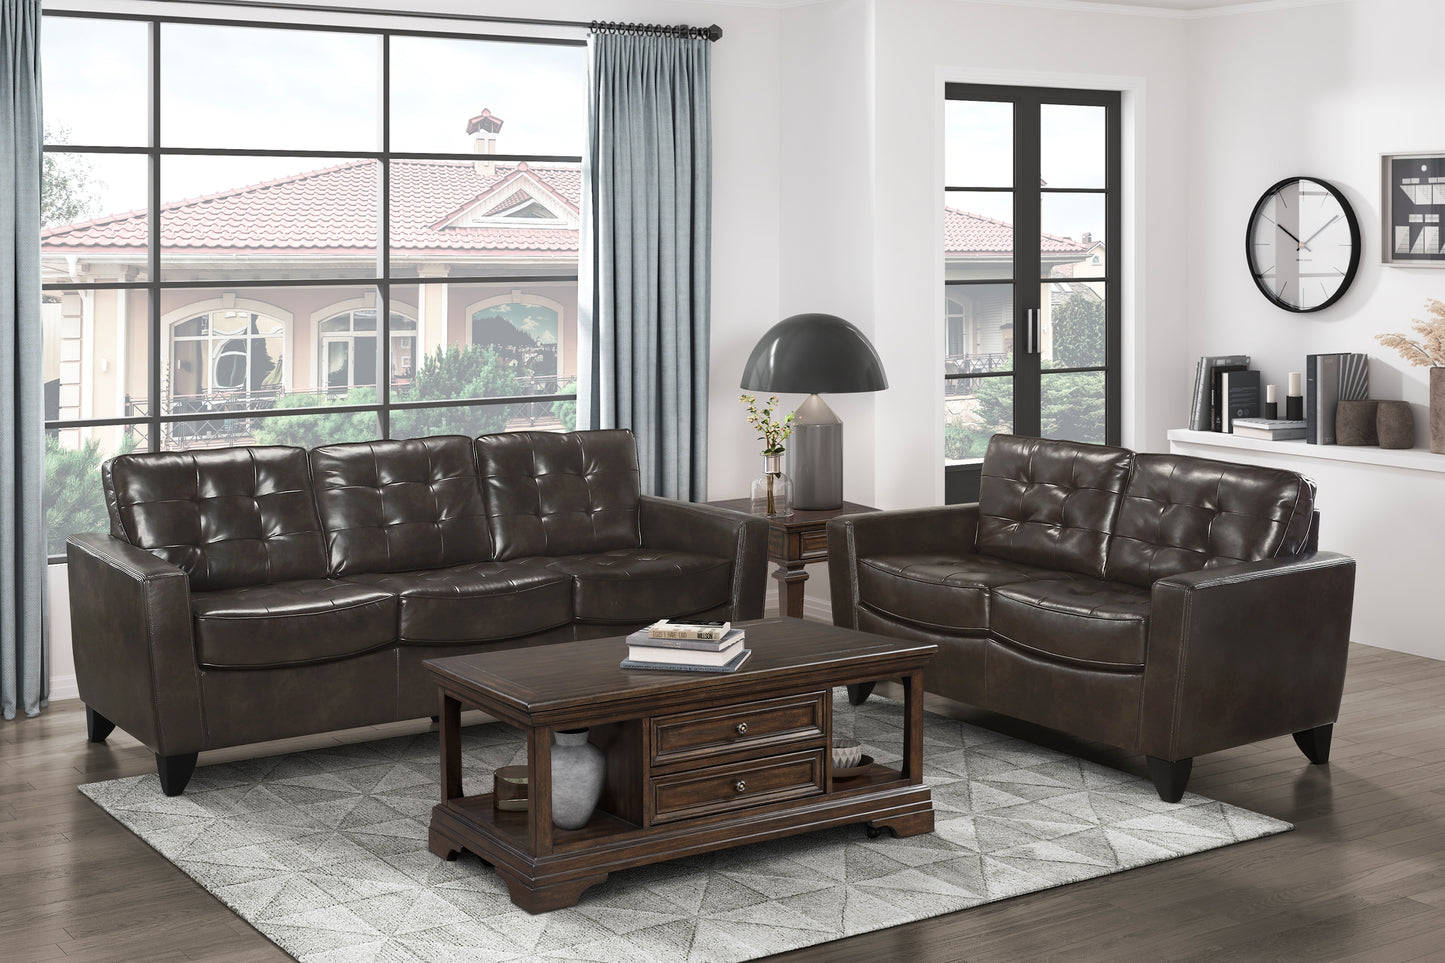 Donegal Vinly Sofa BROWN